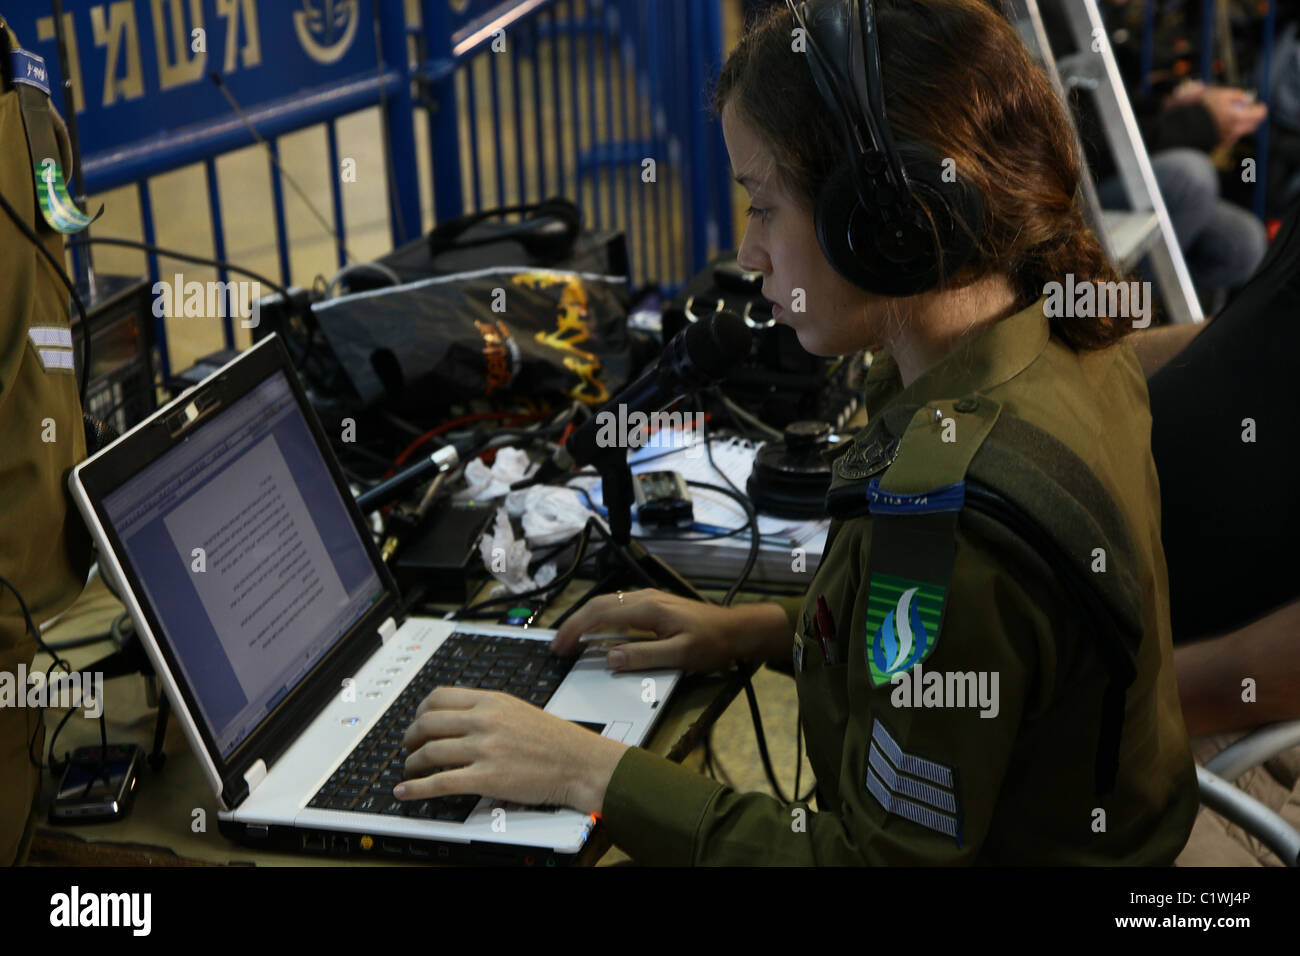 Amalya Duek from radio station Army Radio or Galei Tzahal, known in Israel  by its acronym Galatz, operated by the Israel Defense Forces working on a  computer during a news coverage in